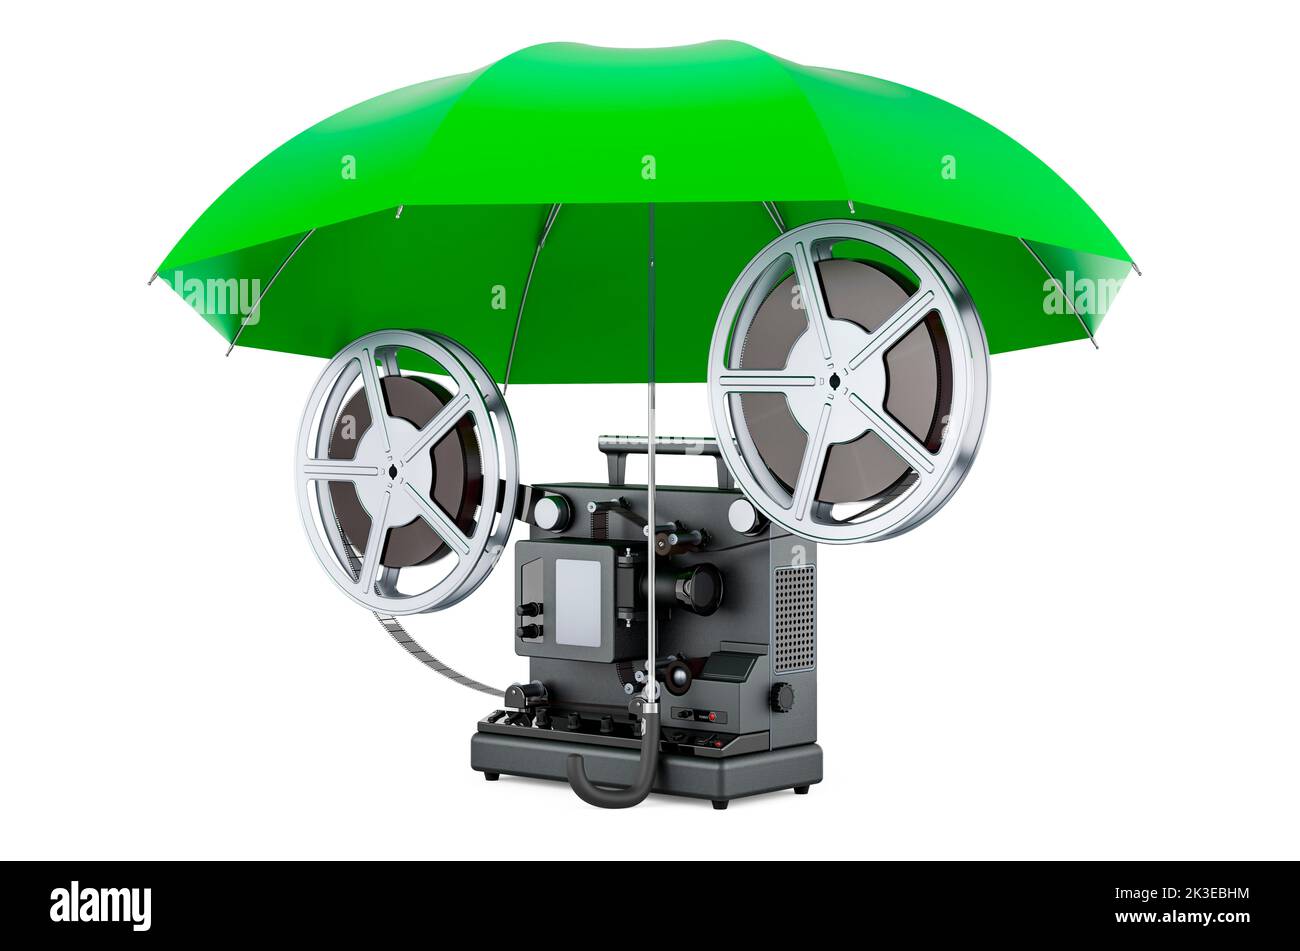 Film projector under umbrella, 3D rendering isolated on white background Stock Photo